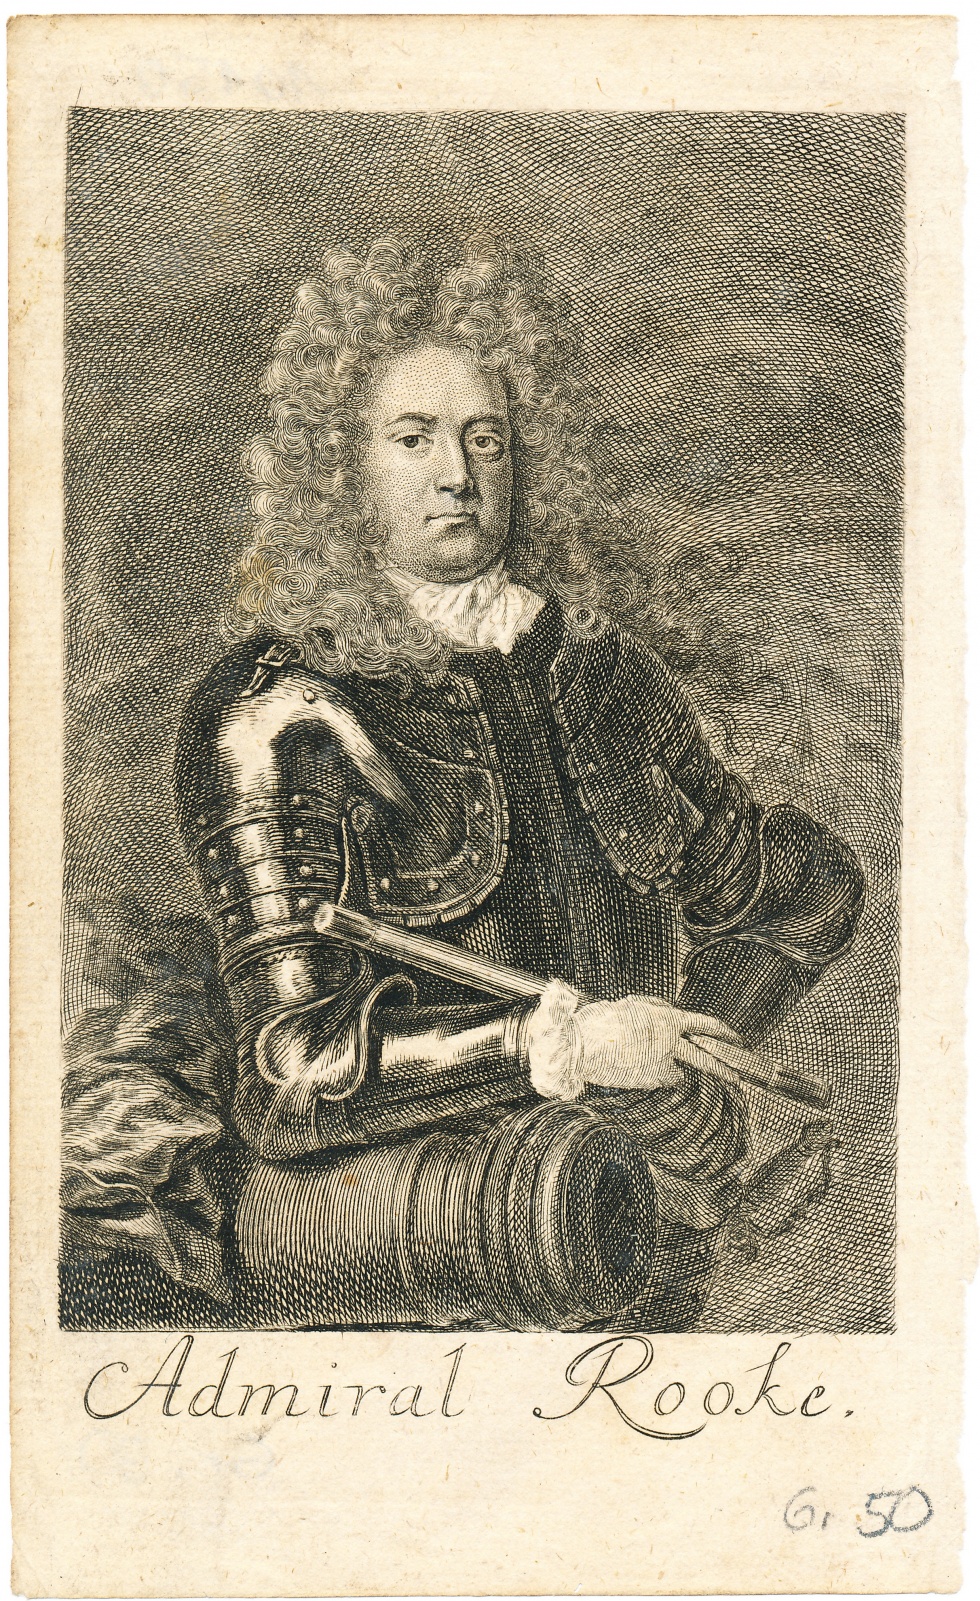 "Admiral Rooke." - Admiral Sir George Rooke (1650-1709) (Schlossmuseum Jever CC BY-NC-SA)